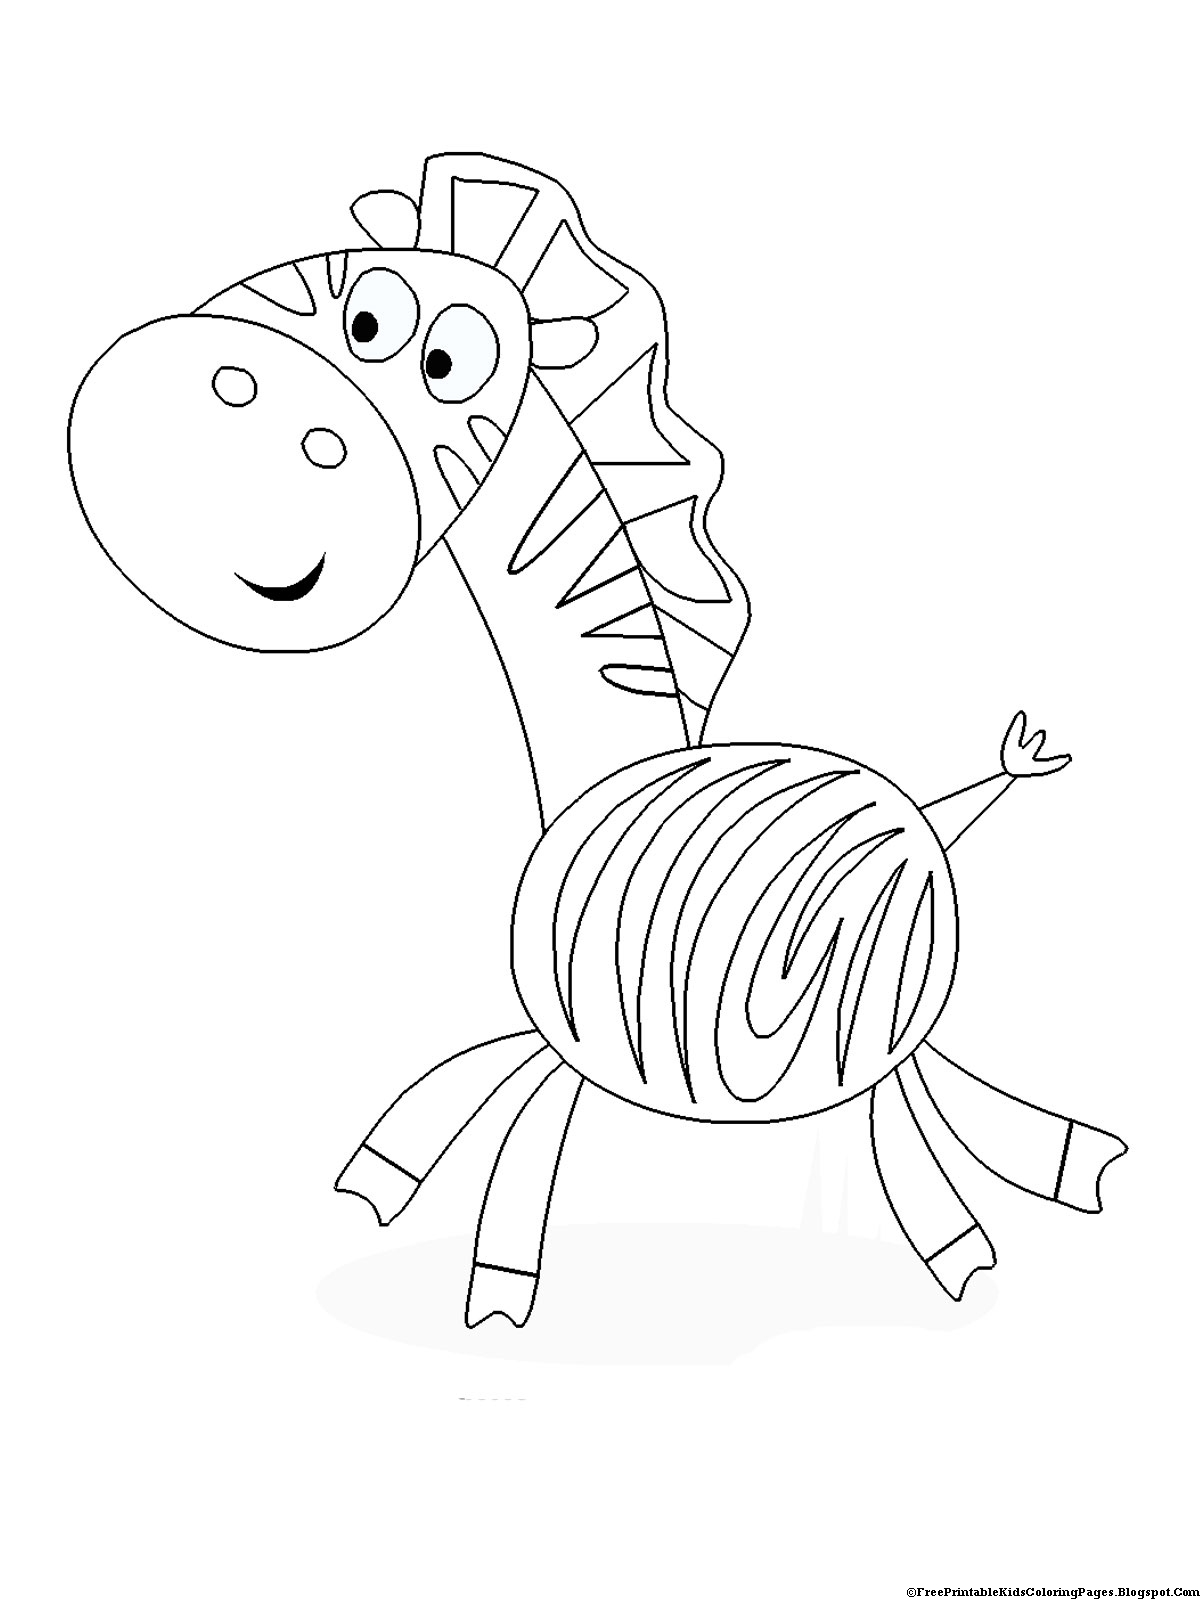 Zebra Coloring Pages Free Printable Kids Coloring Pages